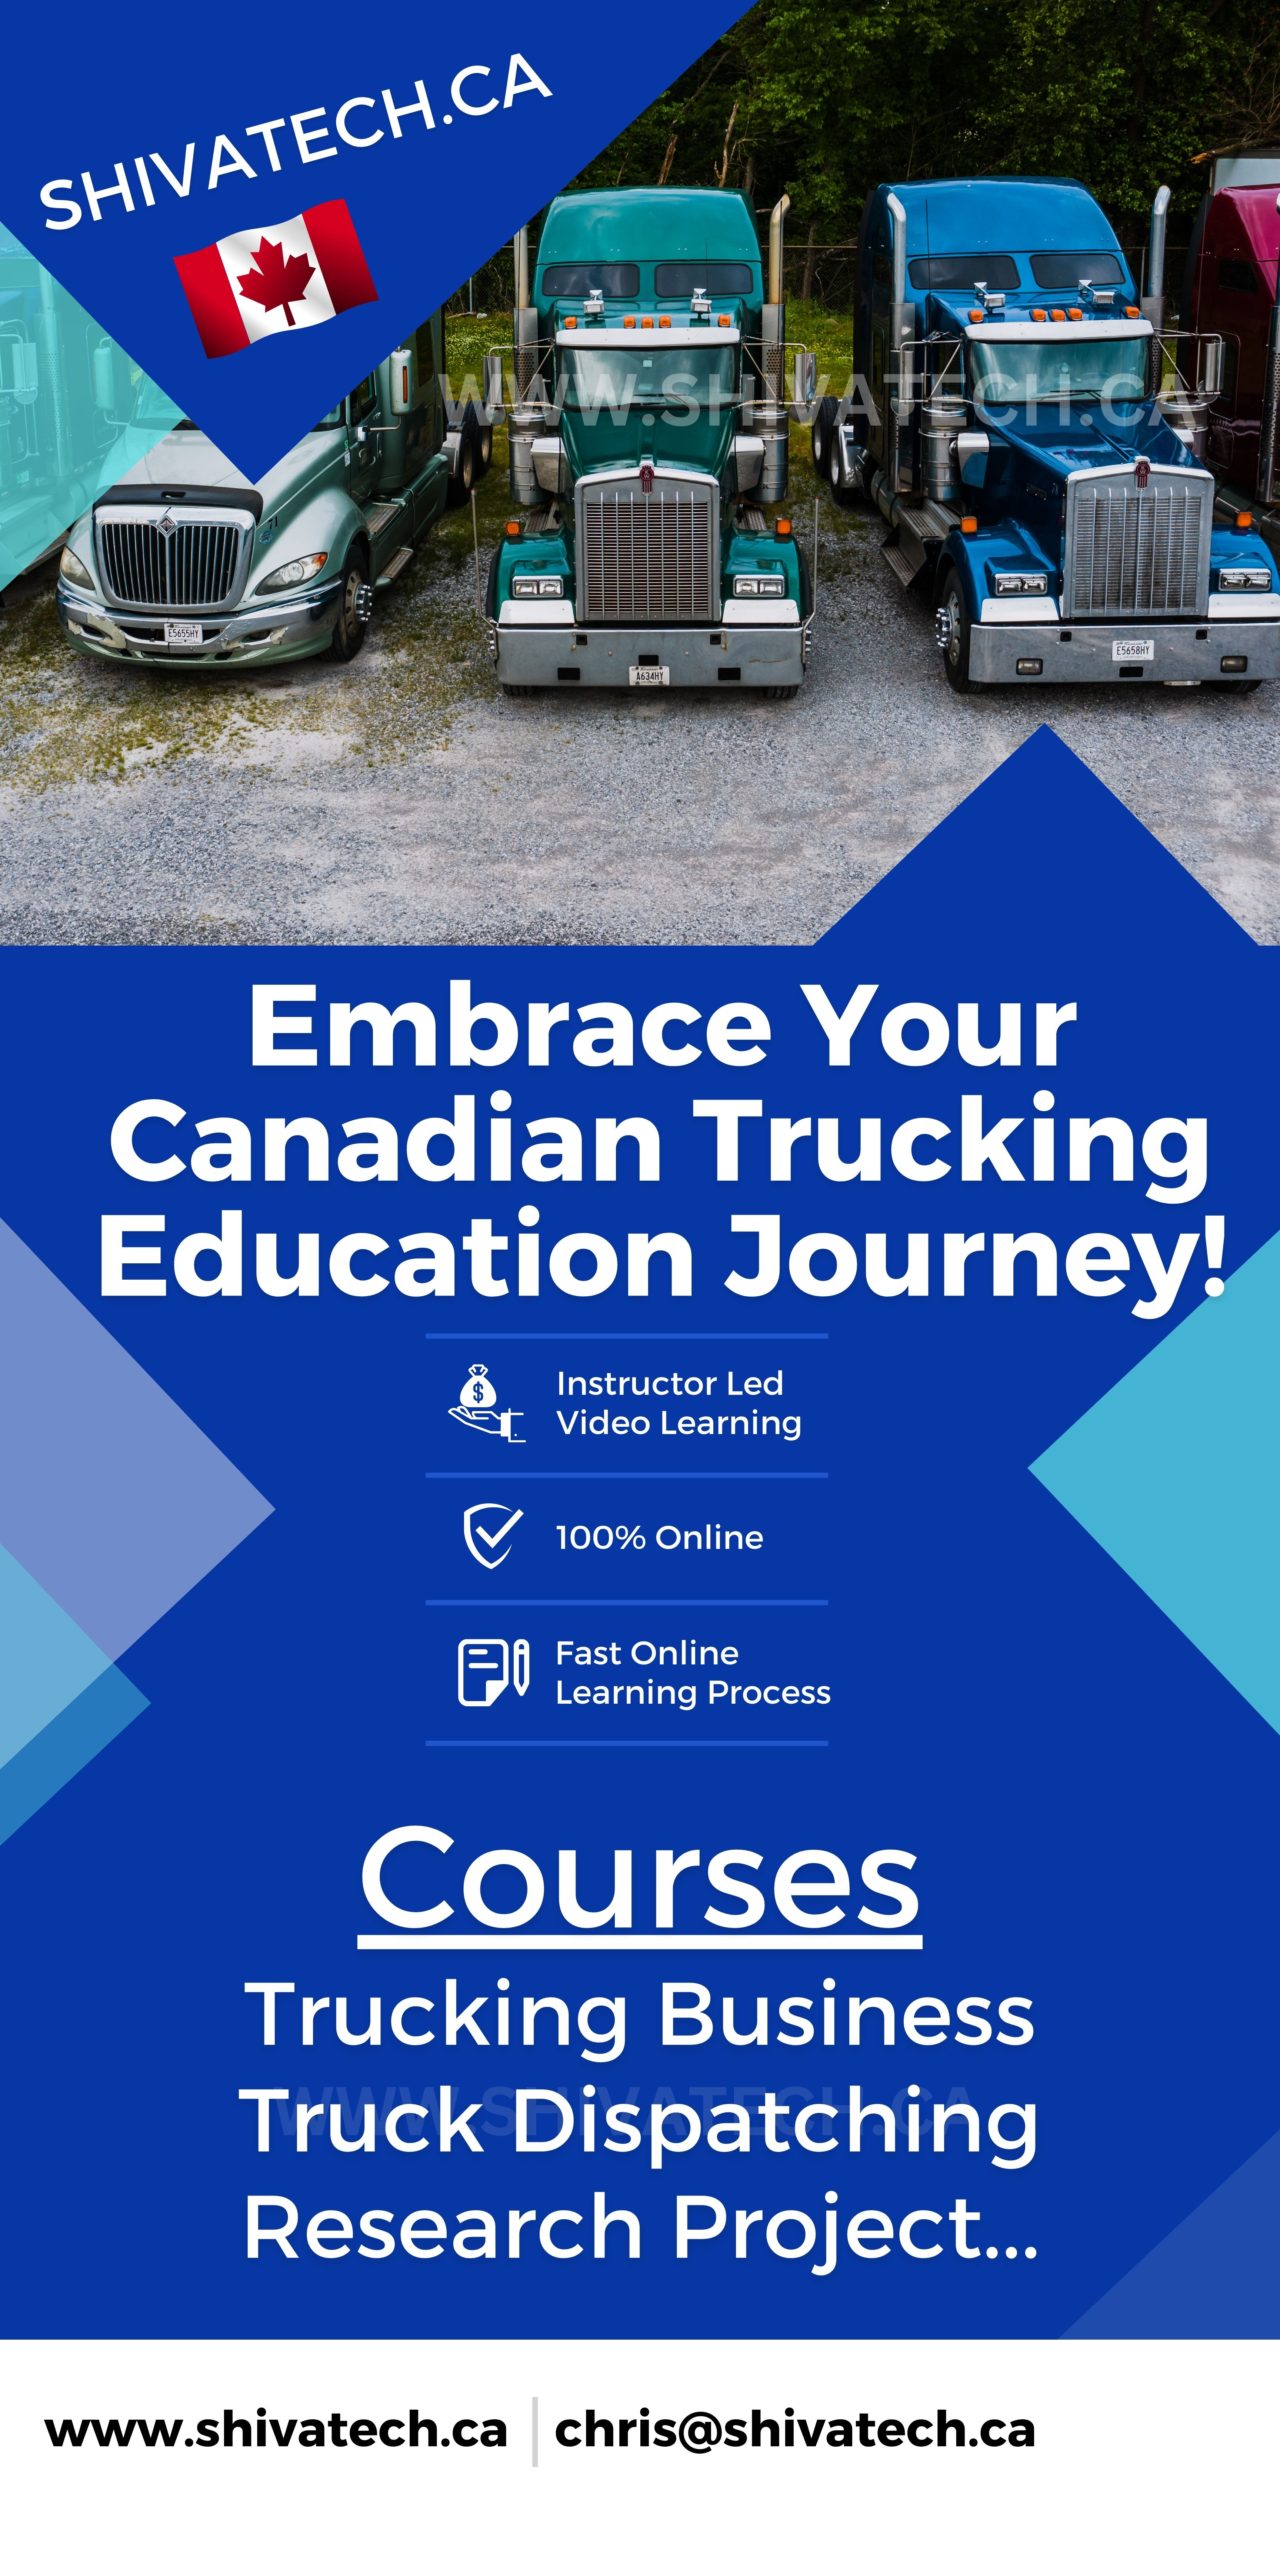 Learn-about-trucking-business-in-Canada-from-south-america